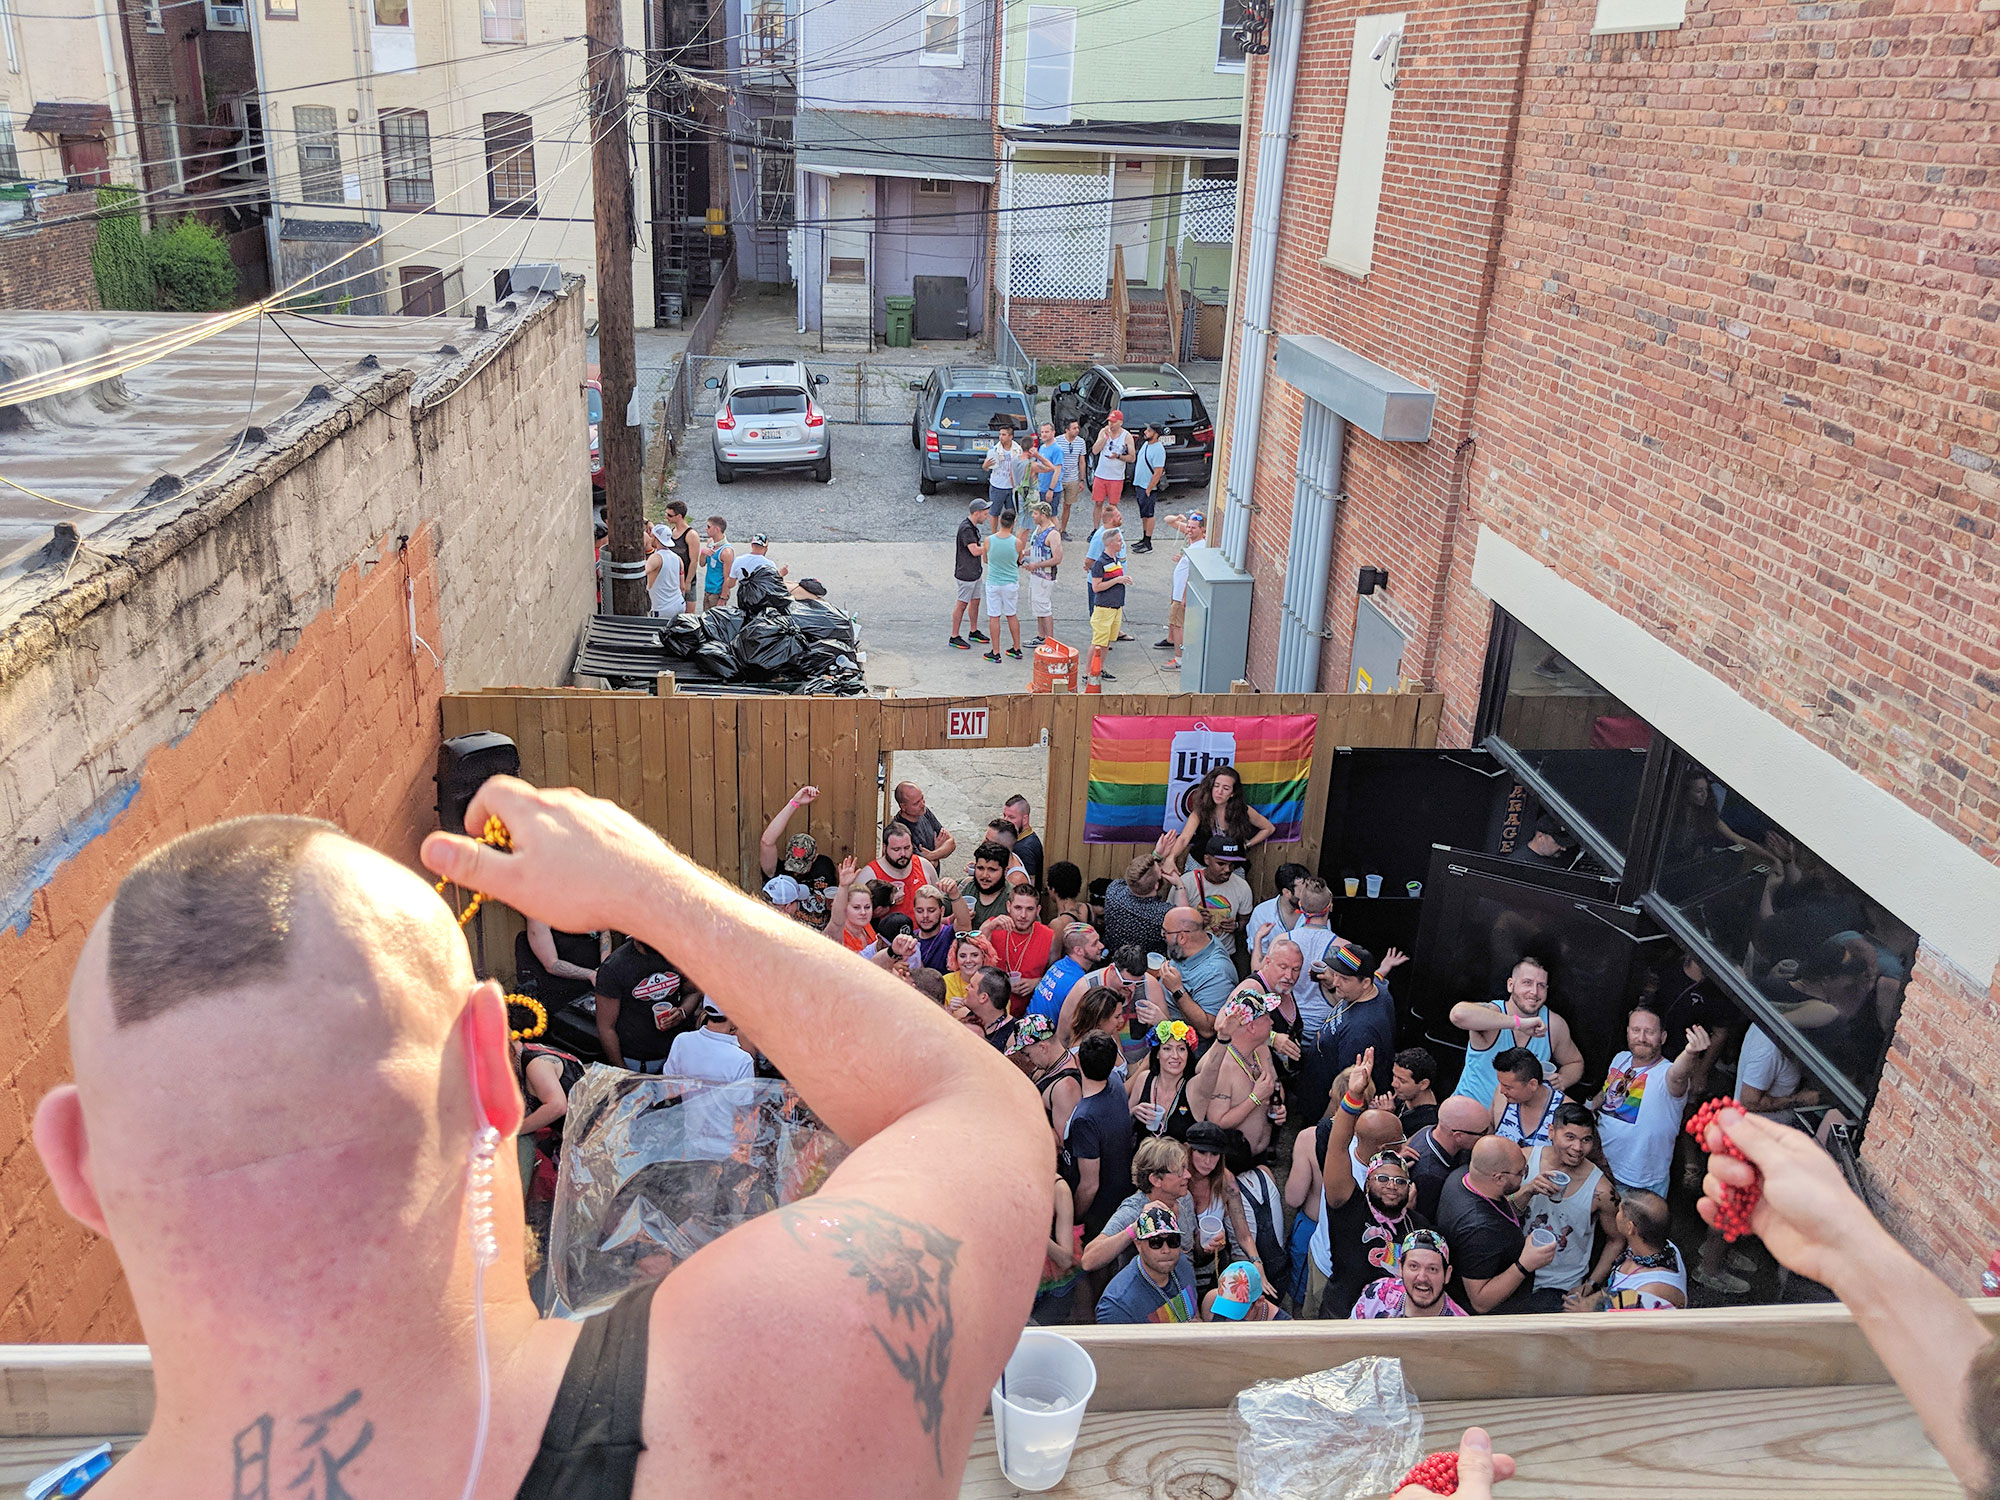 The outside patio crowd at the Baltimore Eagle bar.